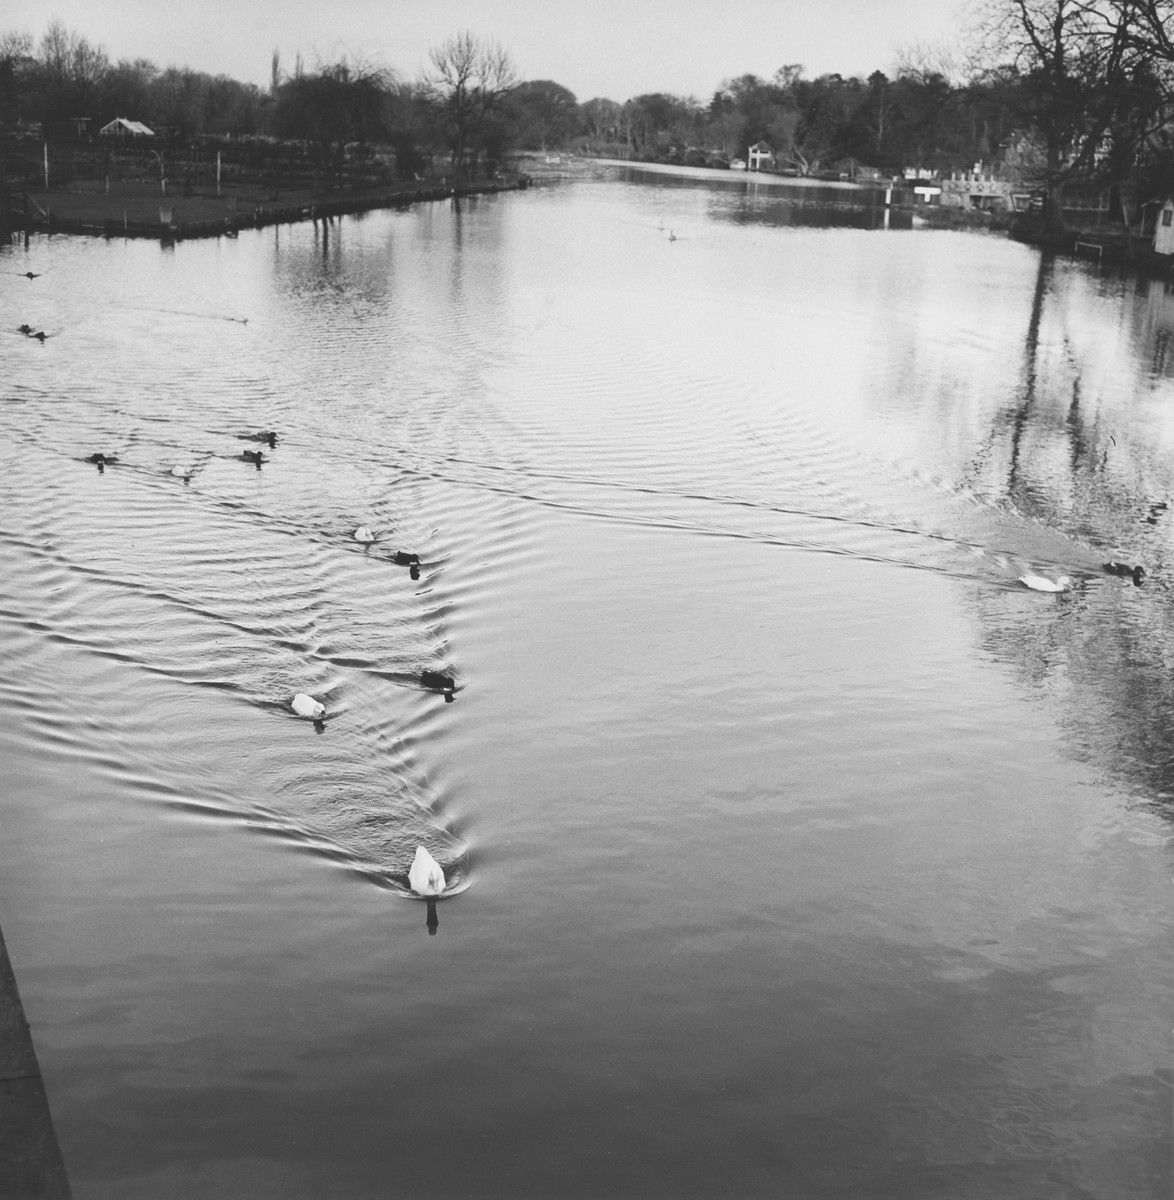 Our archive notes say this action shot depicts ducks mid-race downstream, on the Thames. Unfortunately we don't know the results, and the photographer was unable to interview either the winner or runners-up for comment. However, we suspect the winner was, most likely, a duck